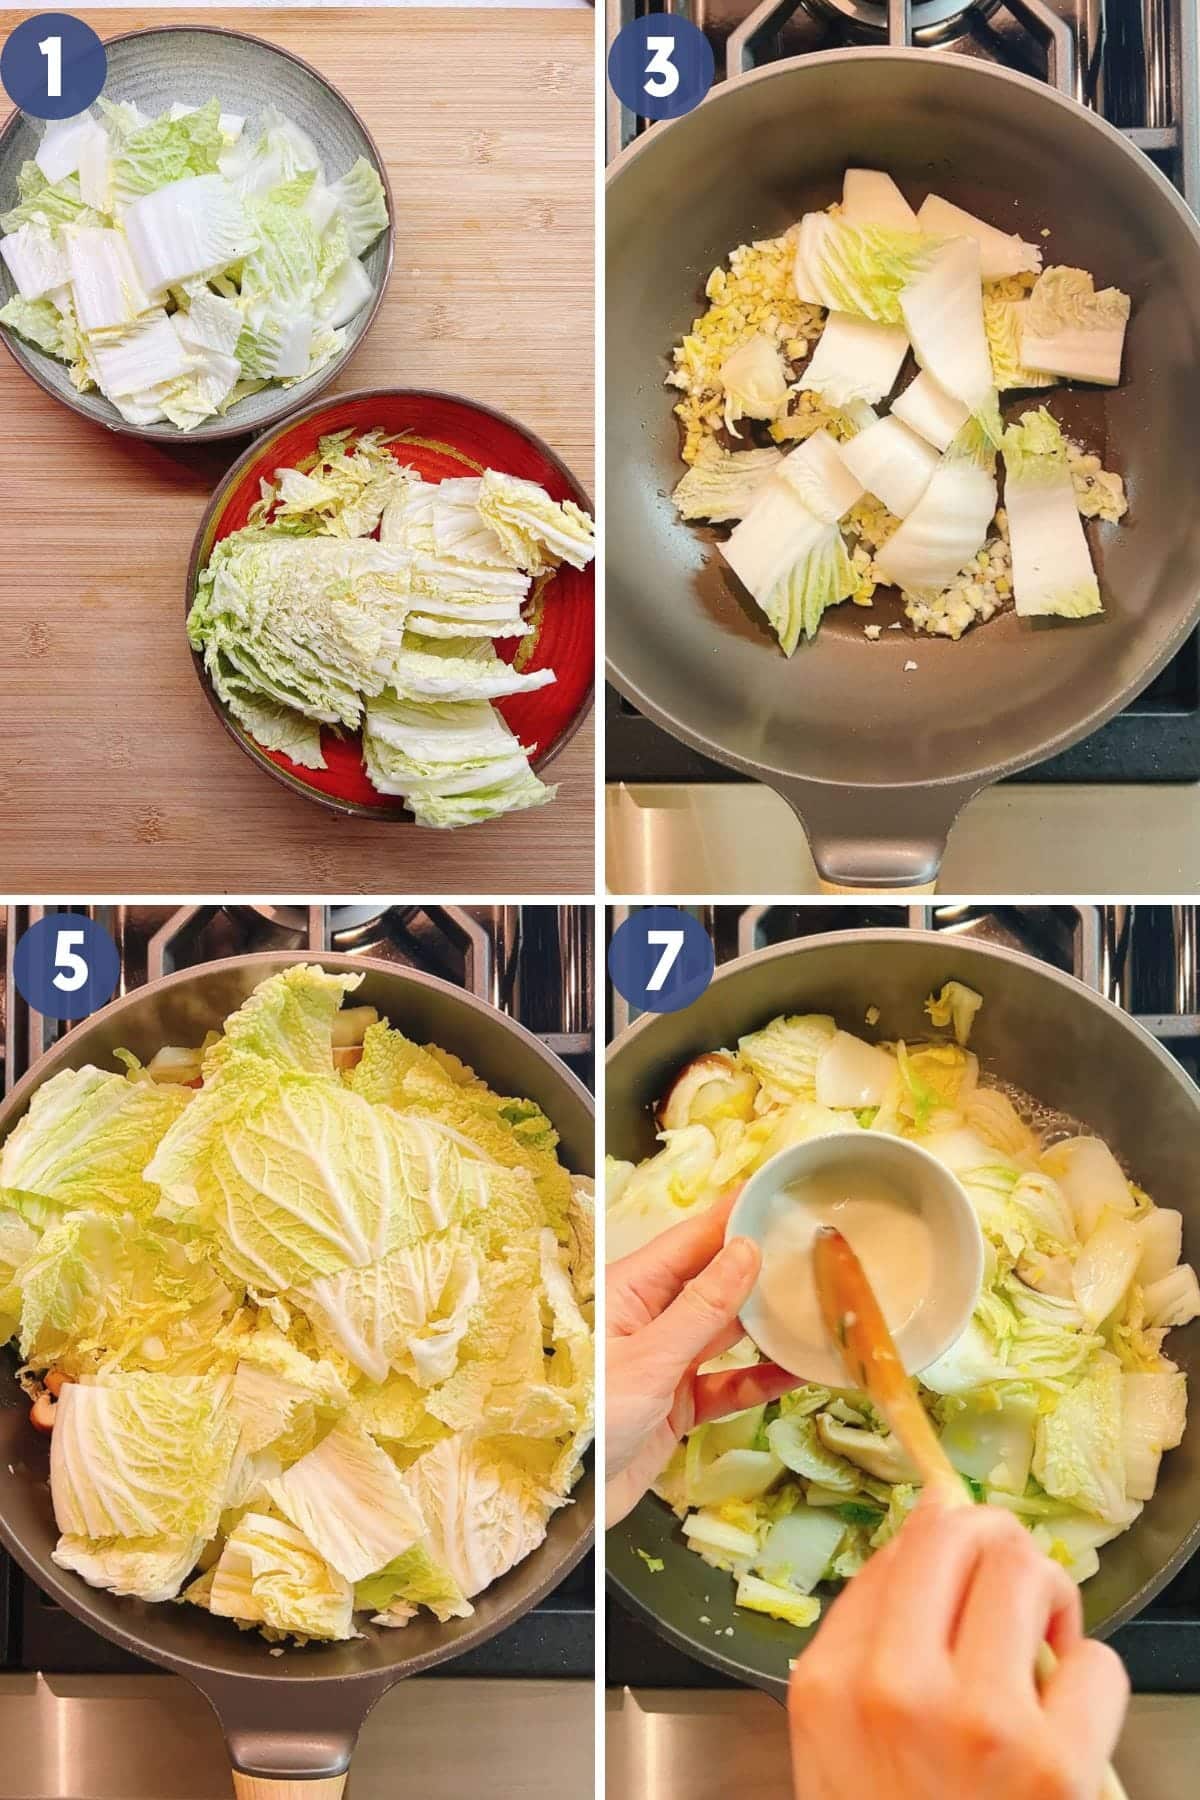 Person demos what to do and how to cook Napa cabbage with step-by-step photos.